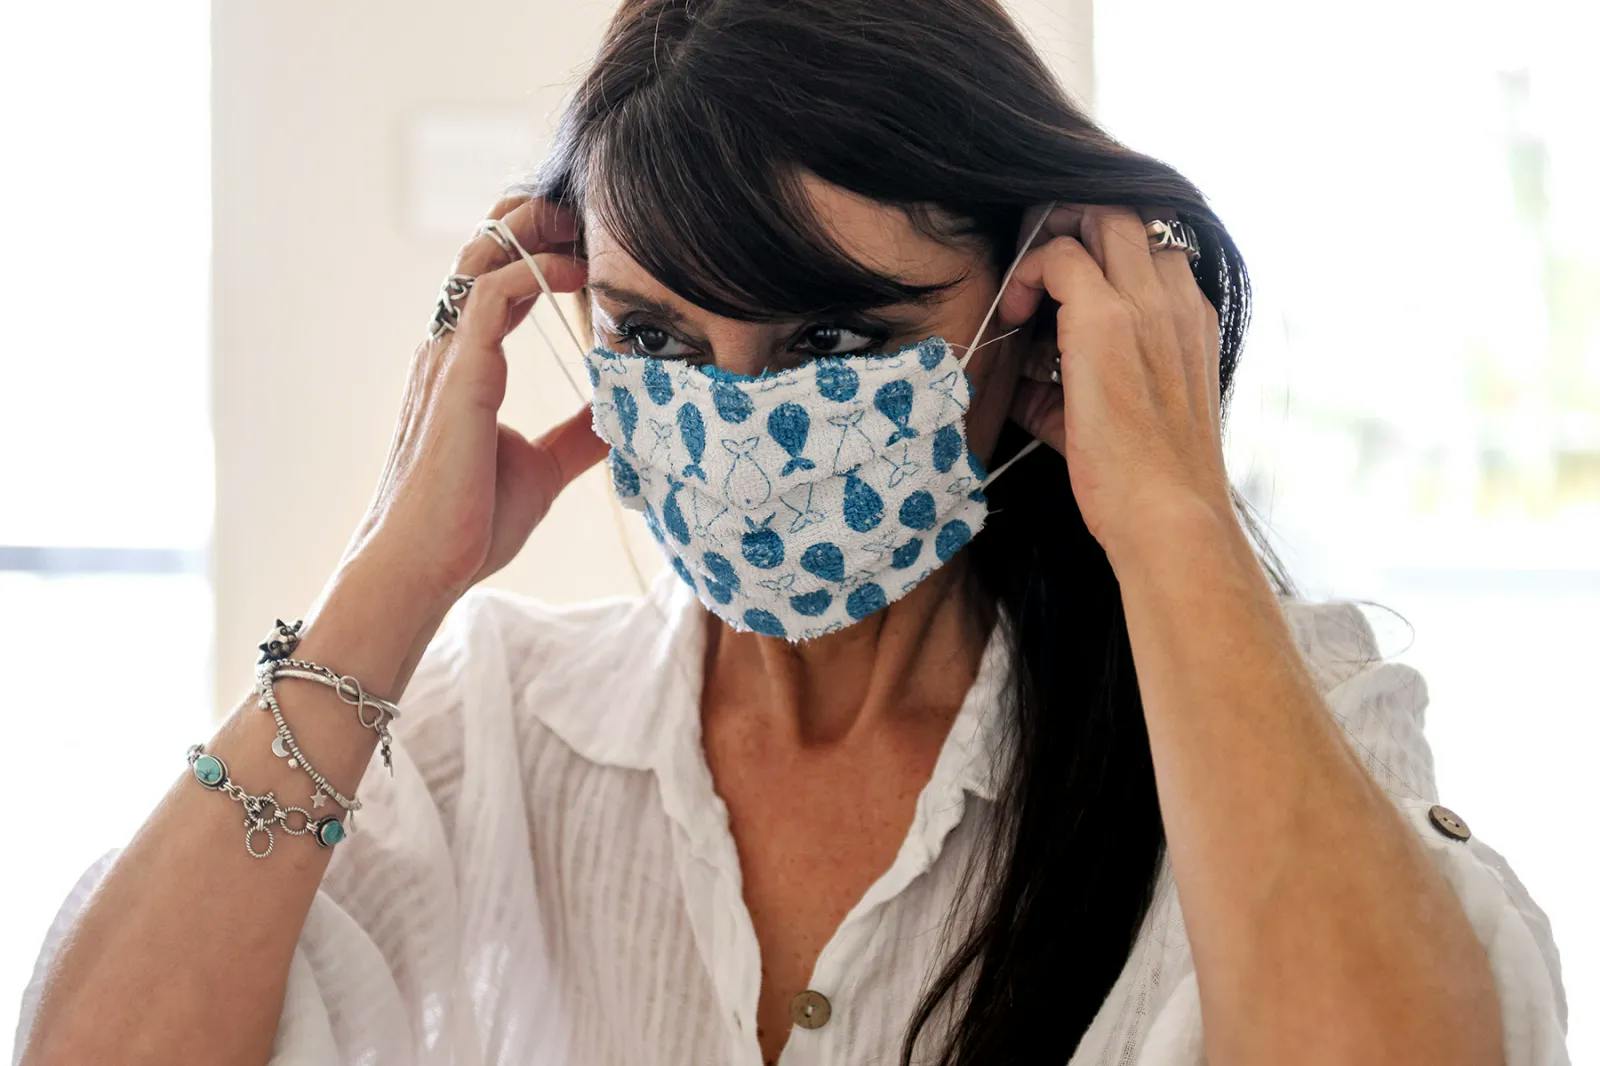 an image of a woman with dark hair putting on a mask